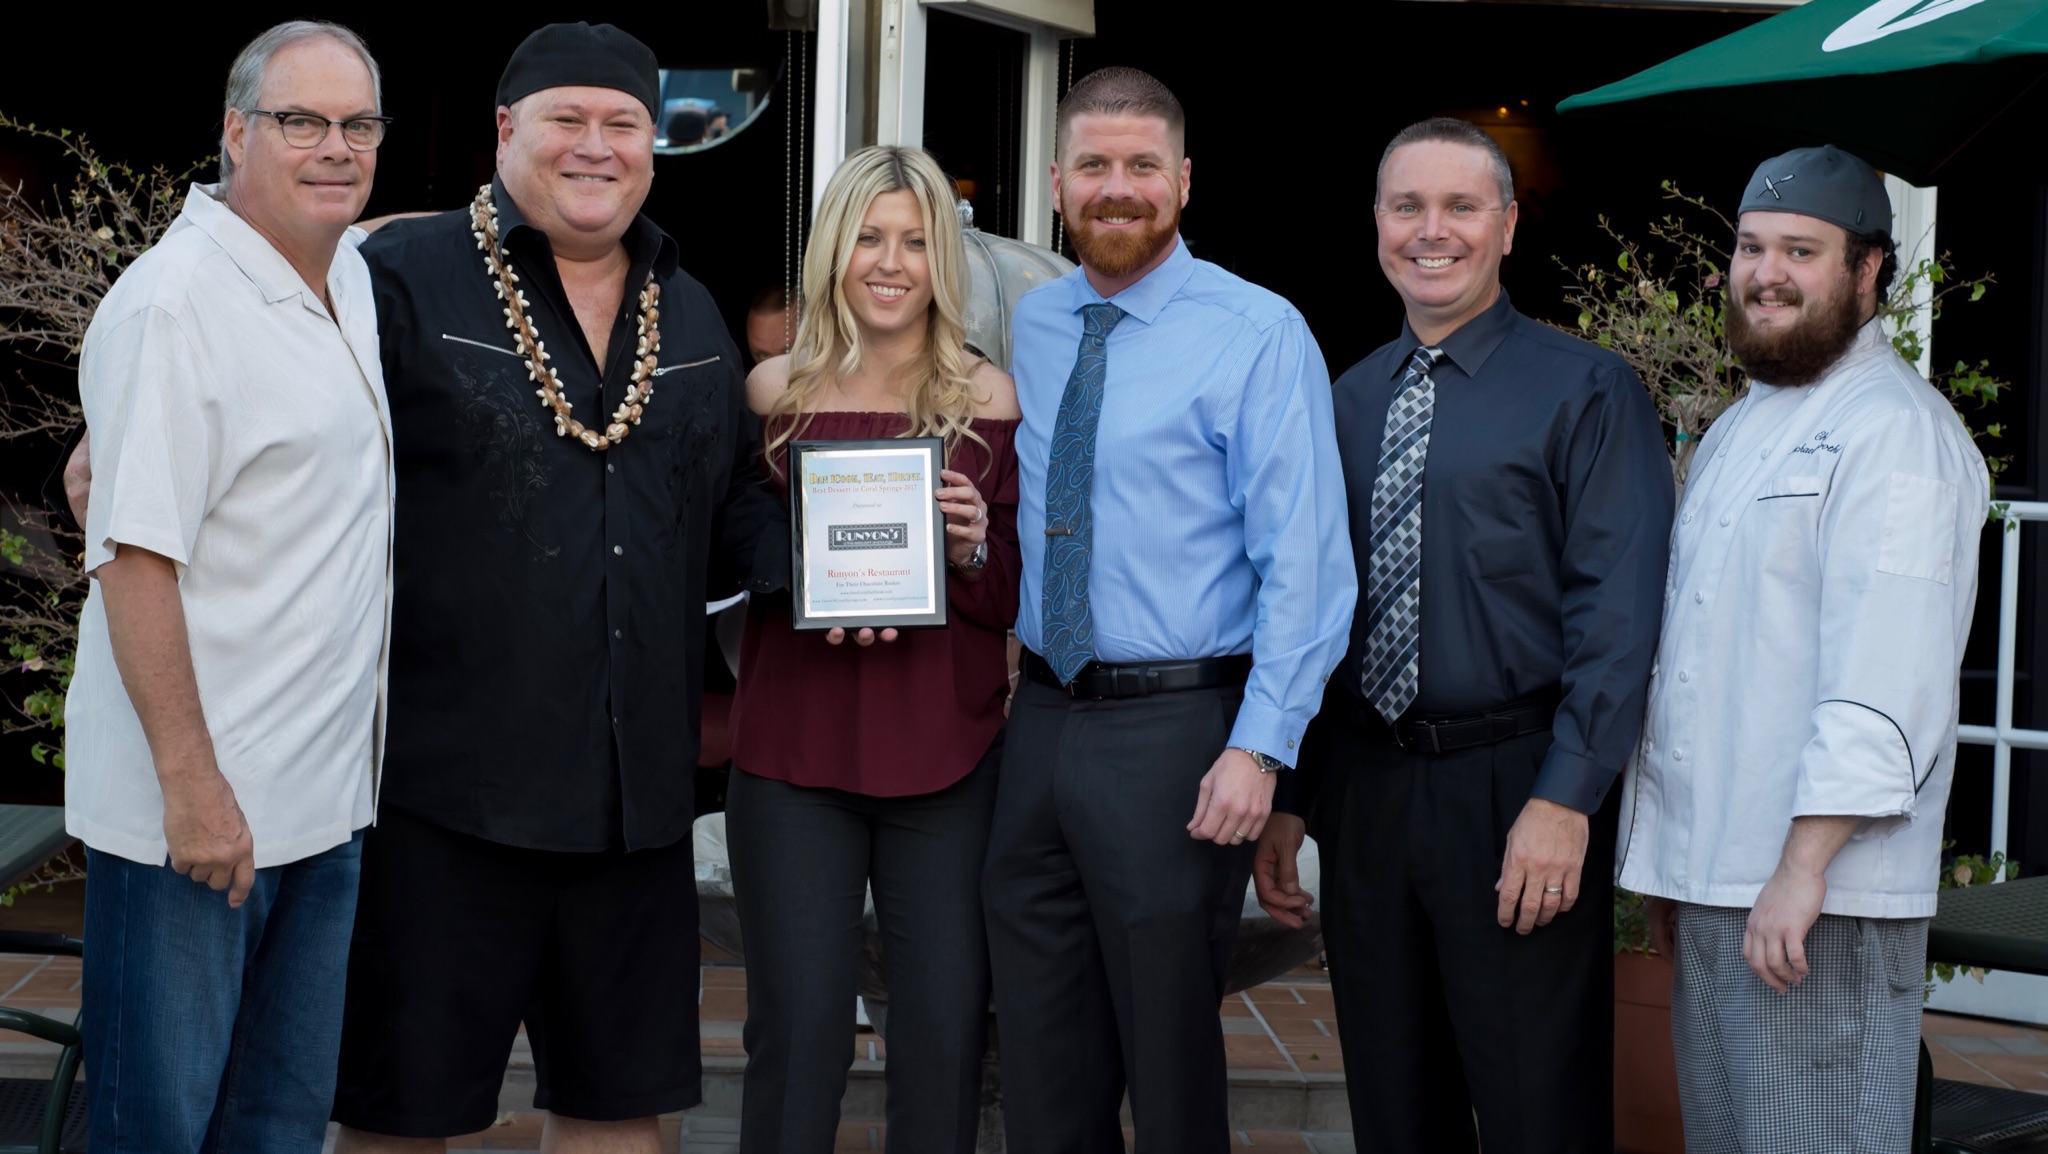 L to R, John Arnold (Taste of Coral Springs), The Talent, Ryan O'Connor ( Owner Runyons), Kevin O''Connor ( Owner Runyons), Joe Kelleher (Manager), Micheal Brothers (Chef). Not pictured Jeff Rosen (Coral Springs Foodie.com) 